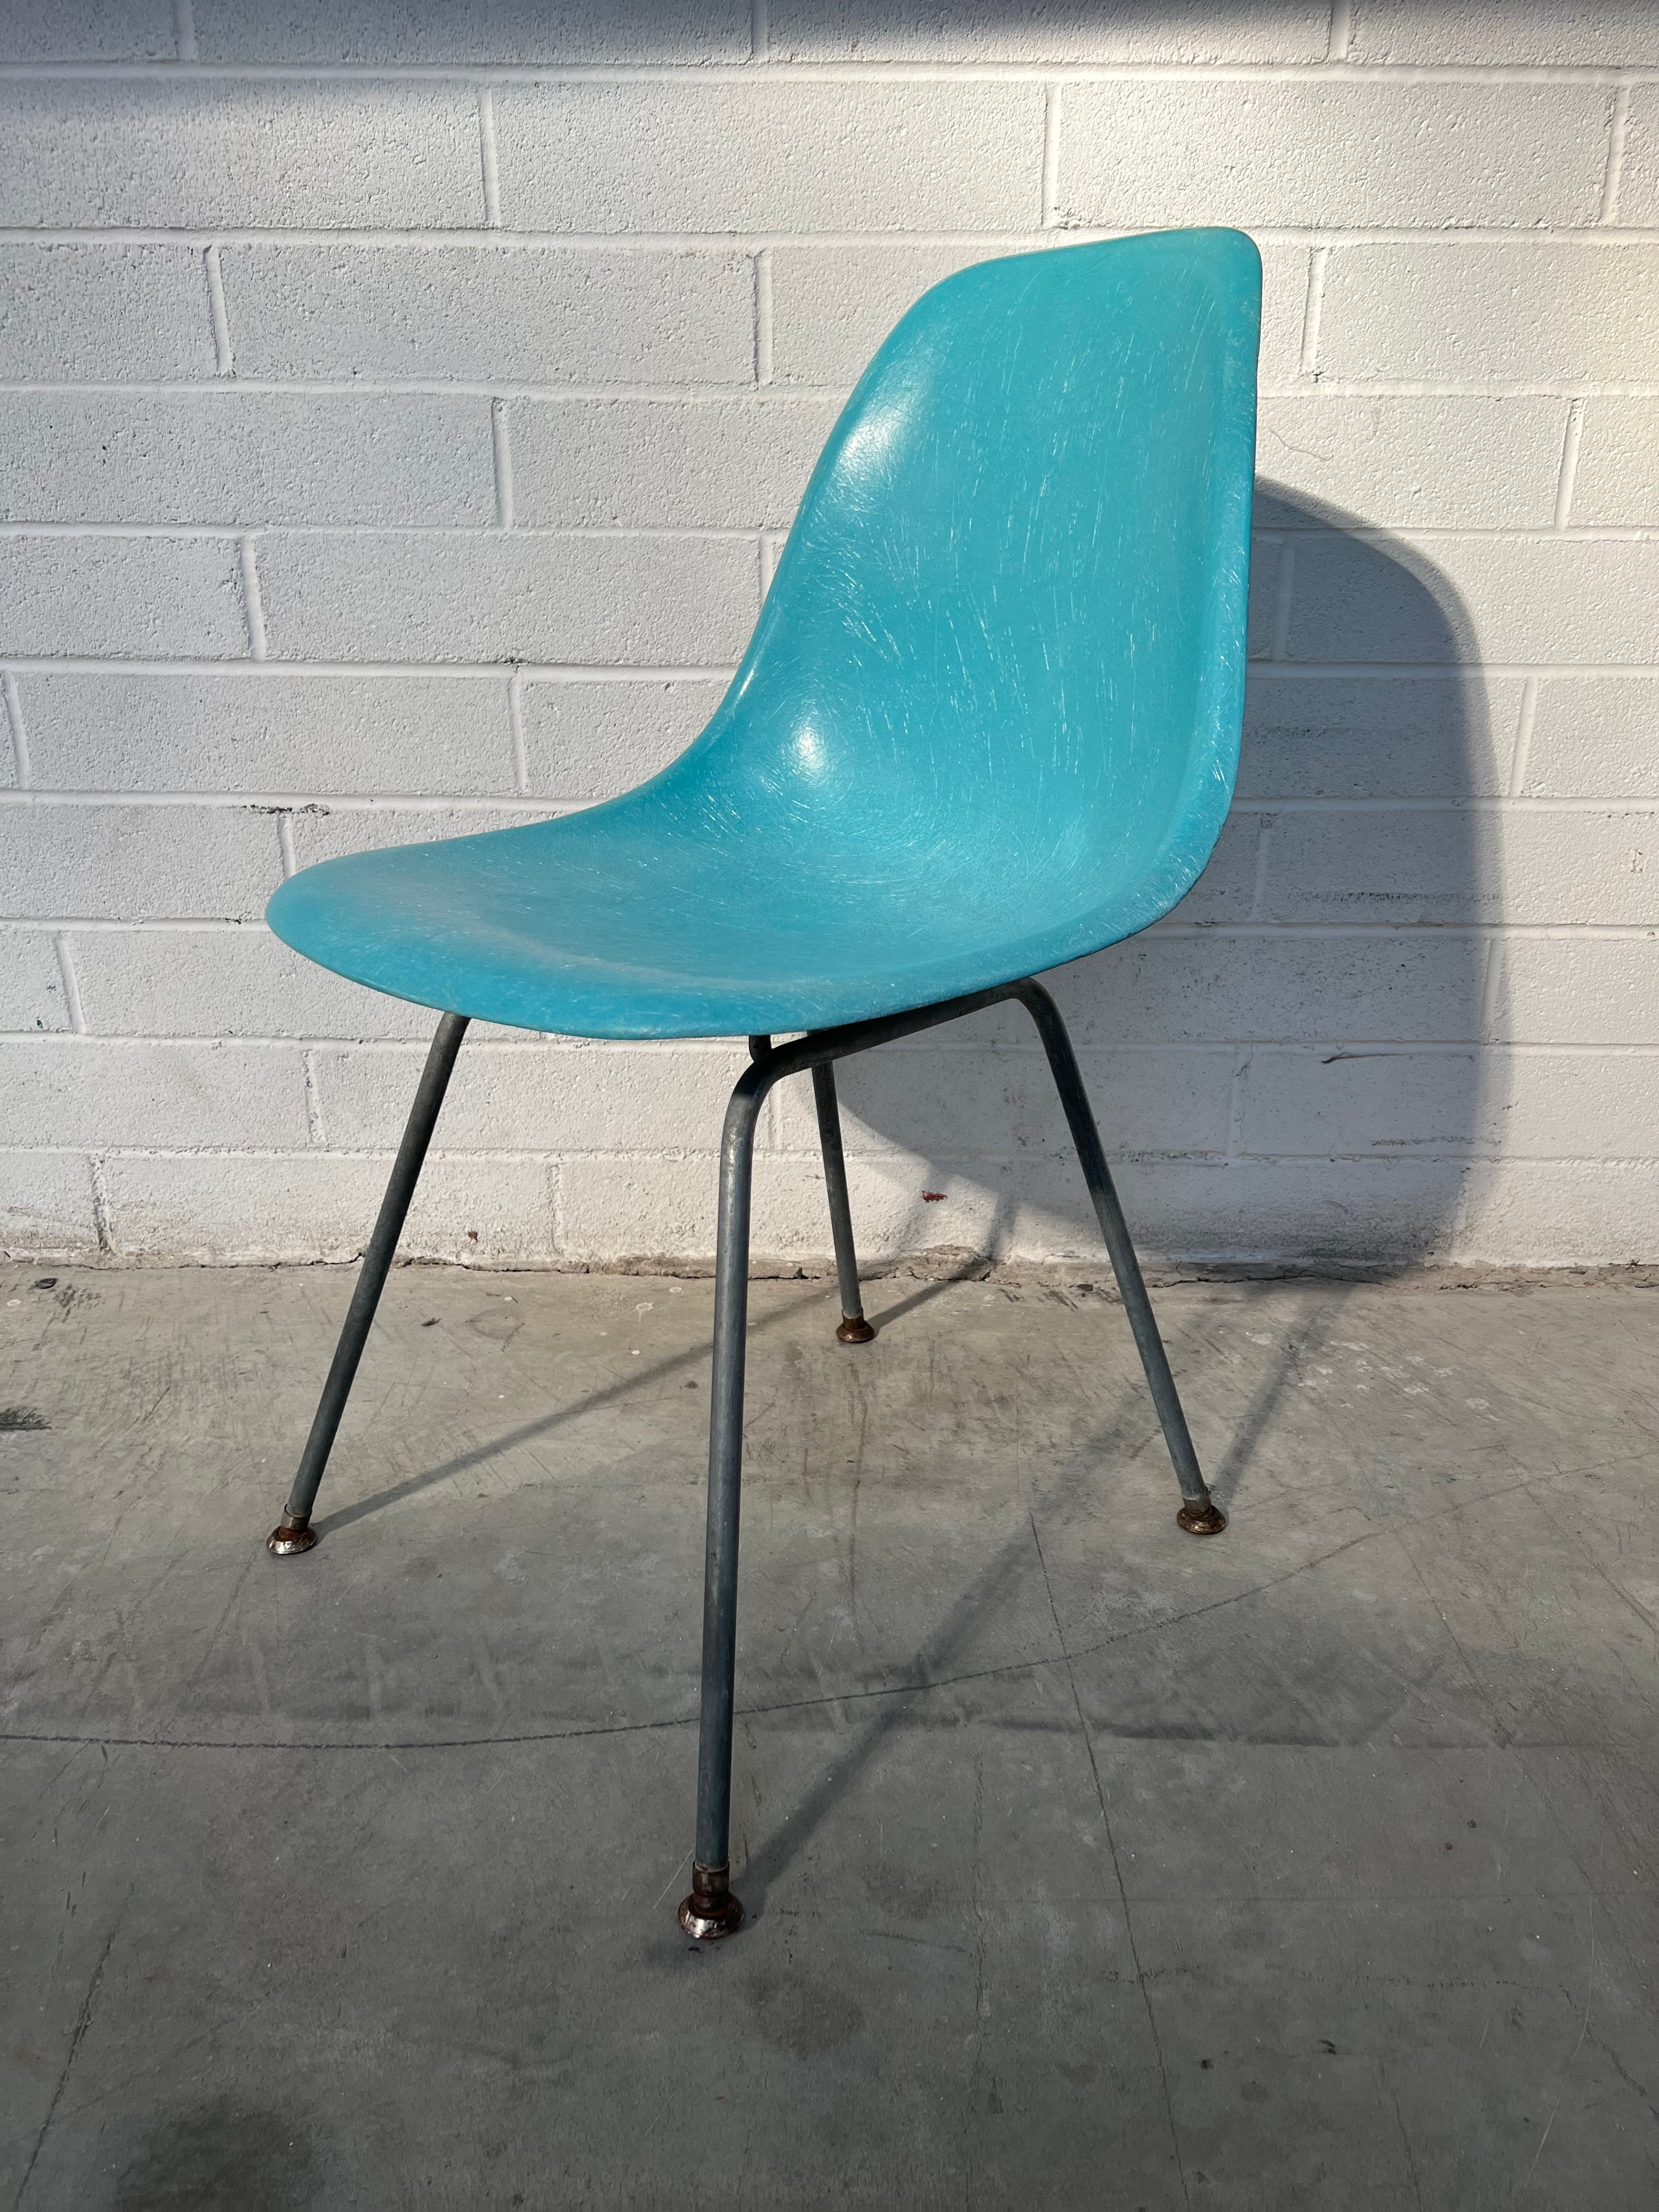 Eames DSX Fiberglass Shell Chairs for Herman Miller - Vintage Turquoise